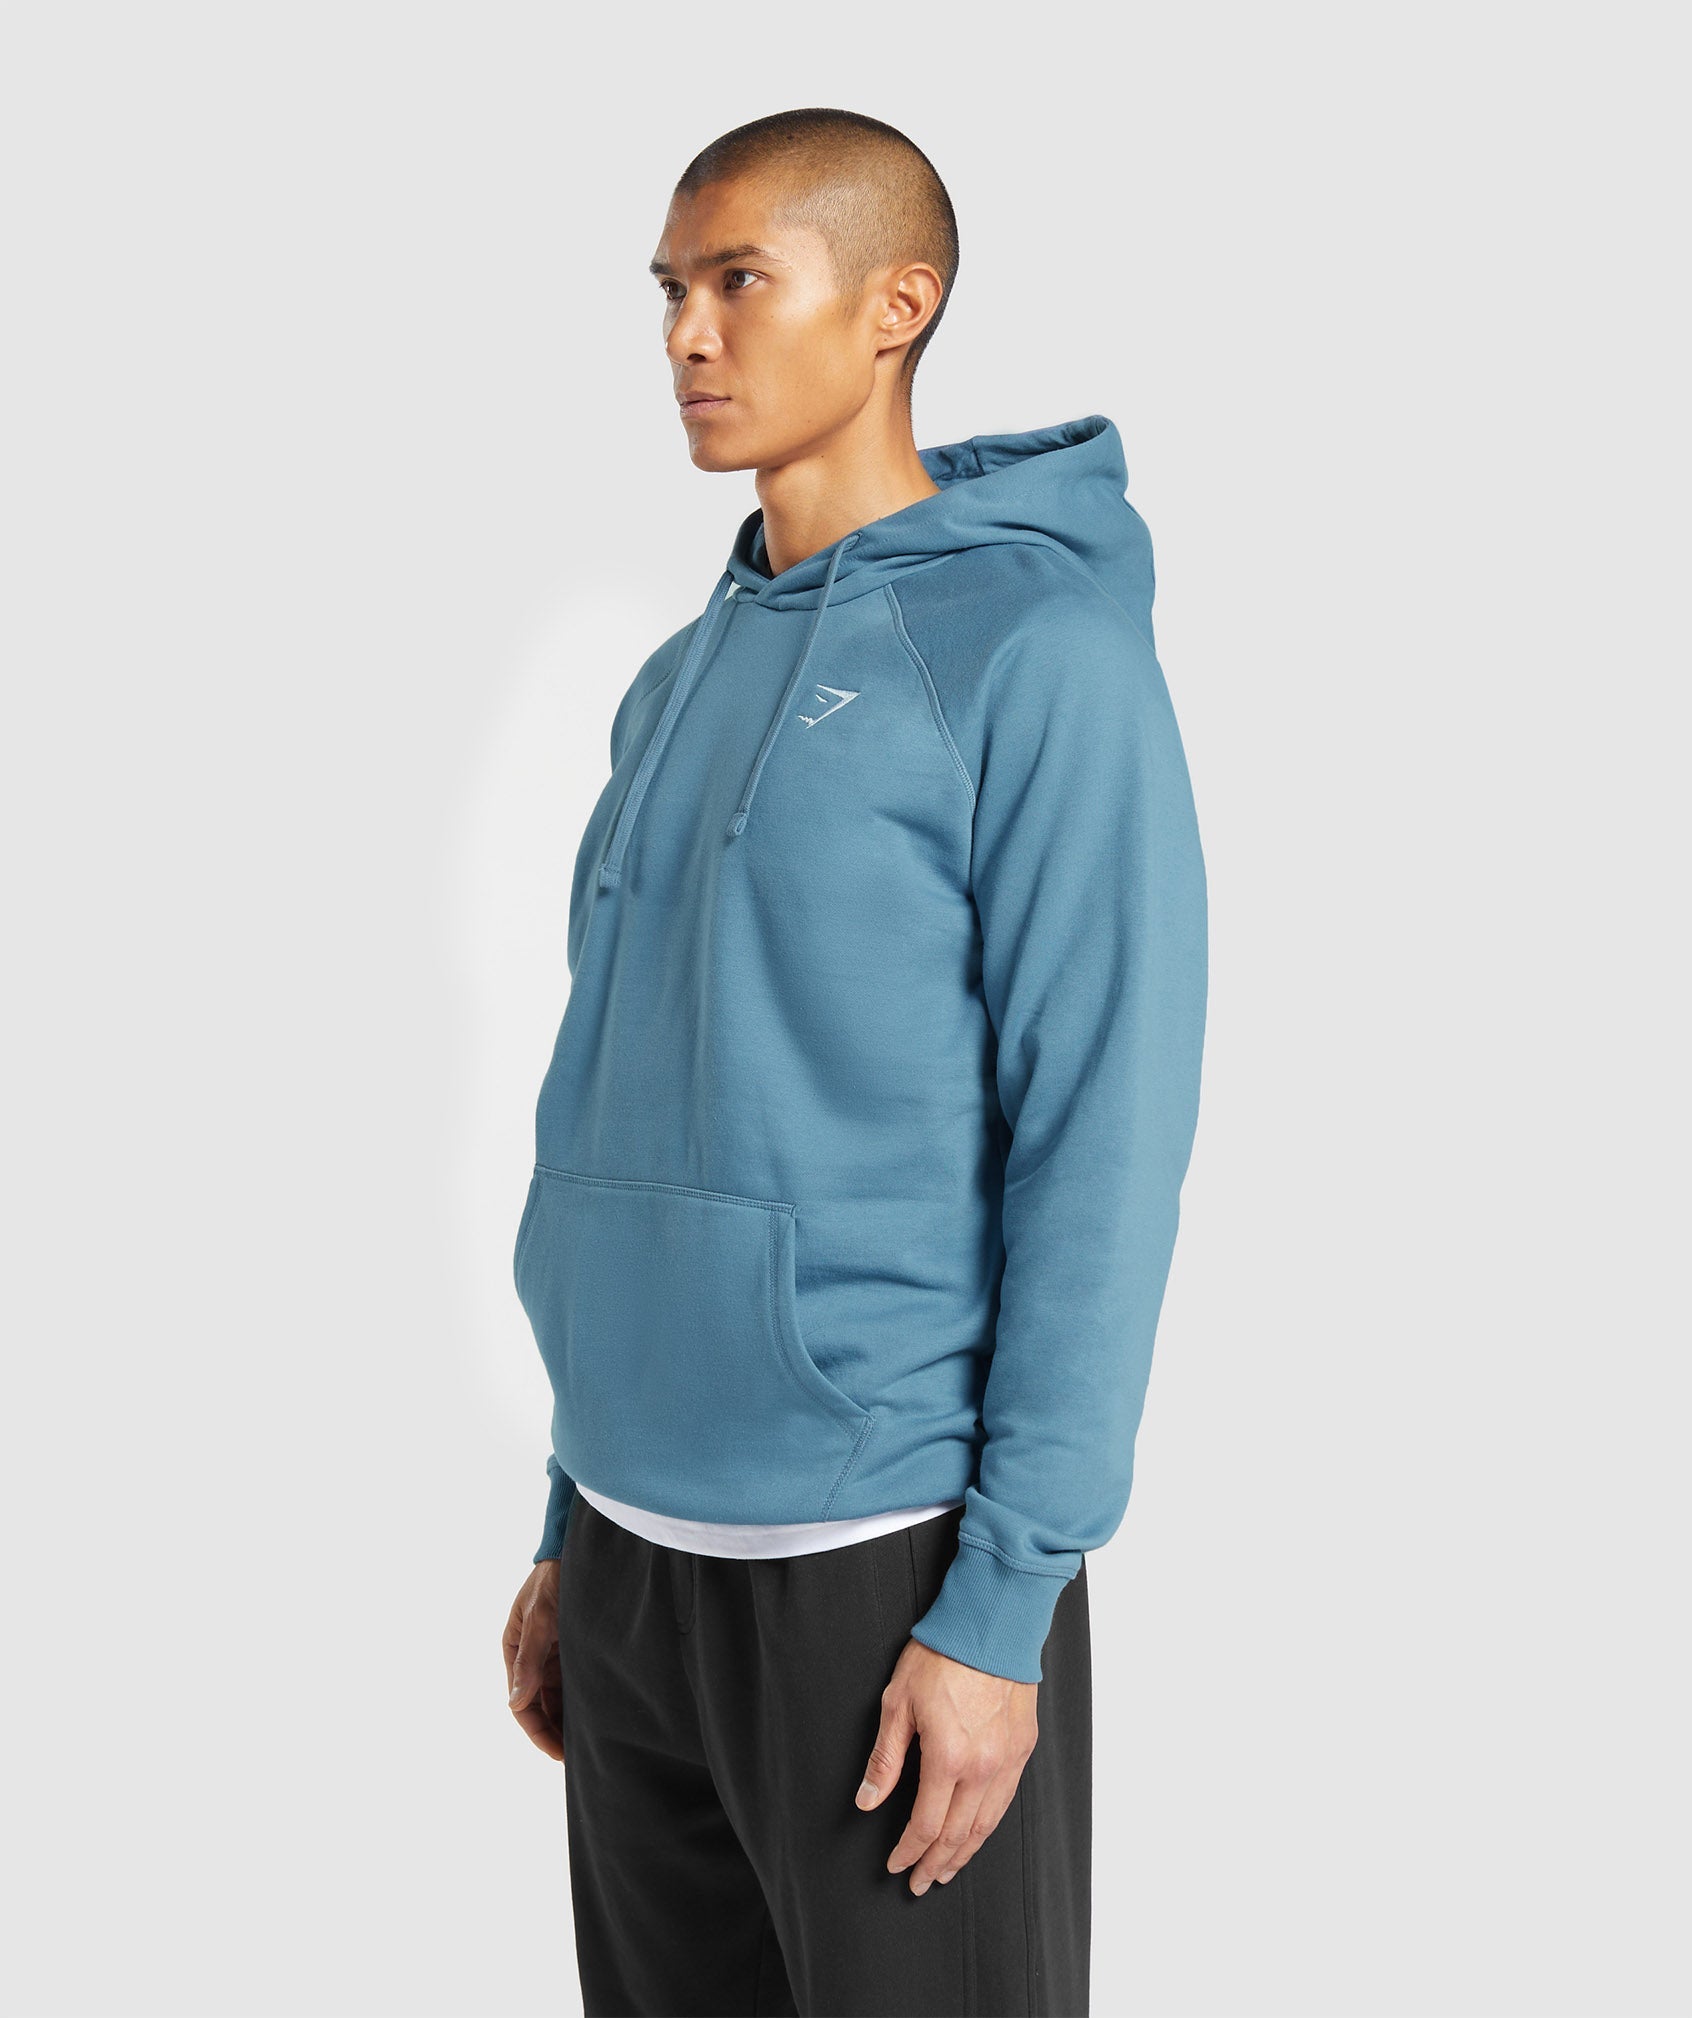 Crest Hoodie in Faded Blue - view 3